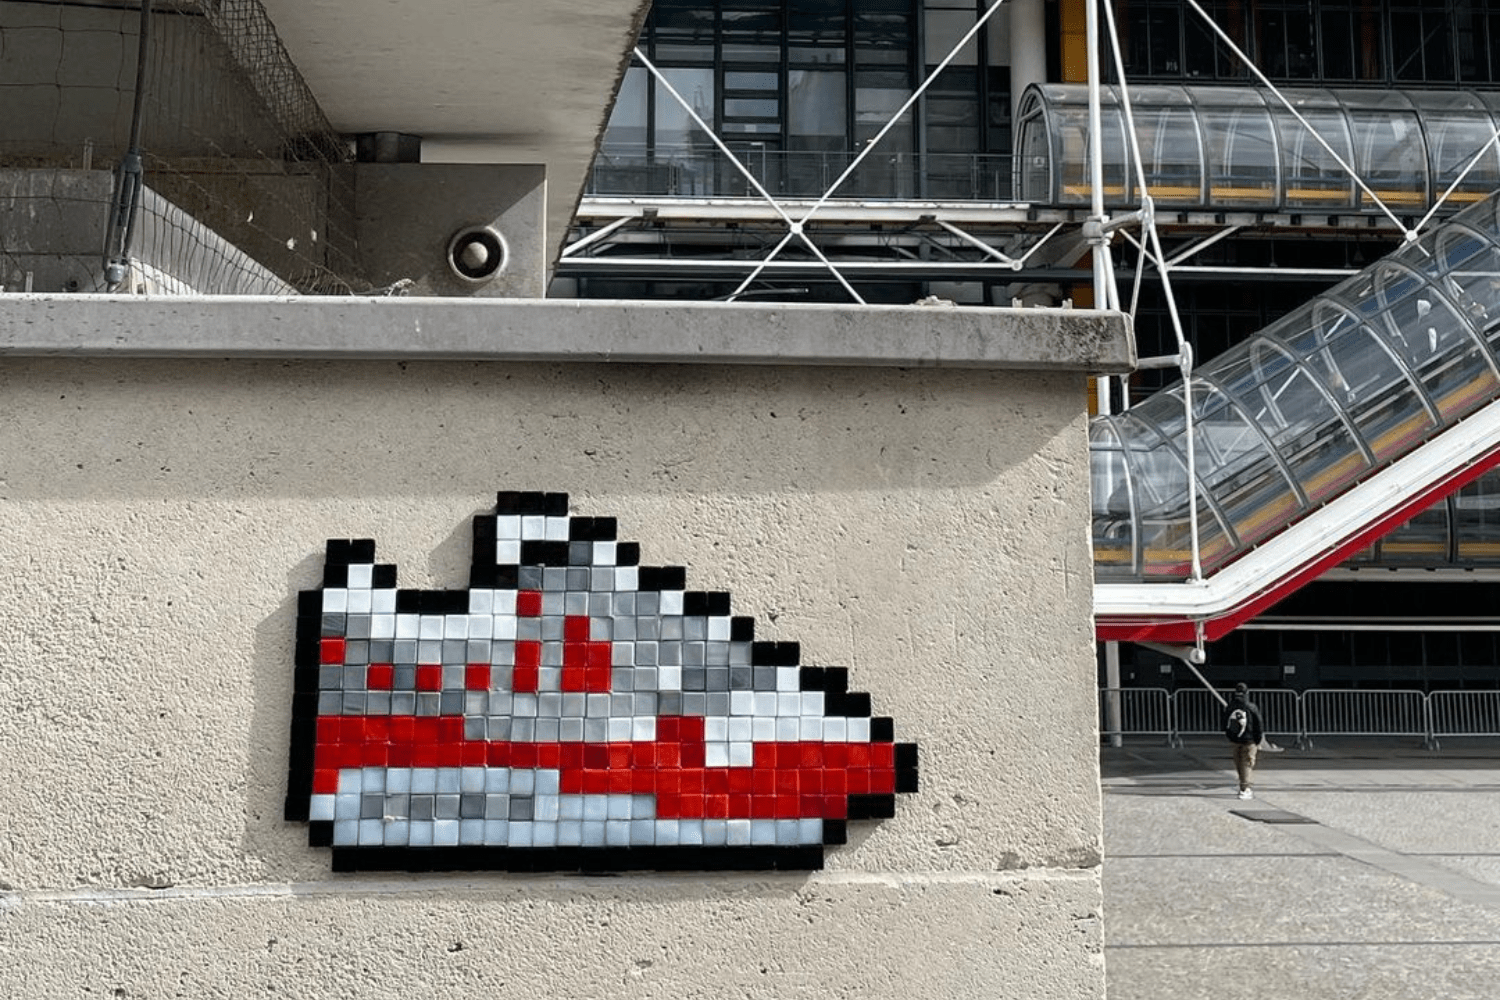 D3C4Y takes over the streets of Paris with his pixelated sneaker artworks